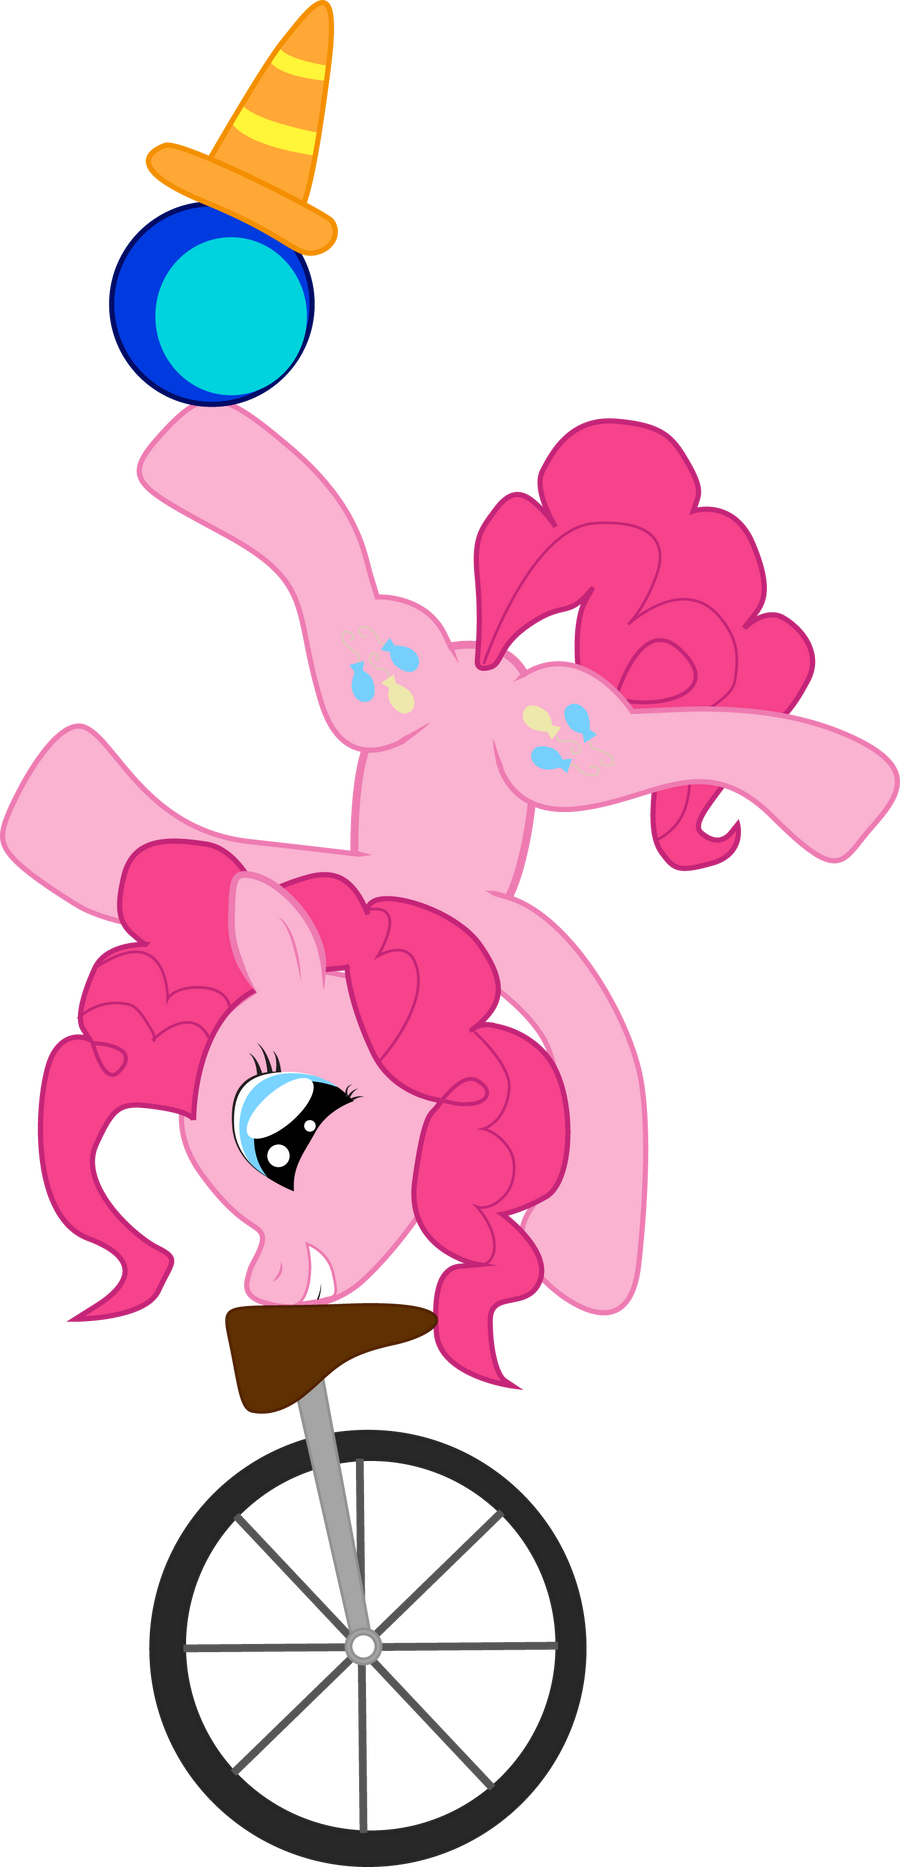 The Premier Pink Party Pony of Ponyville